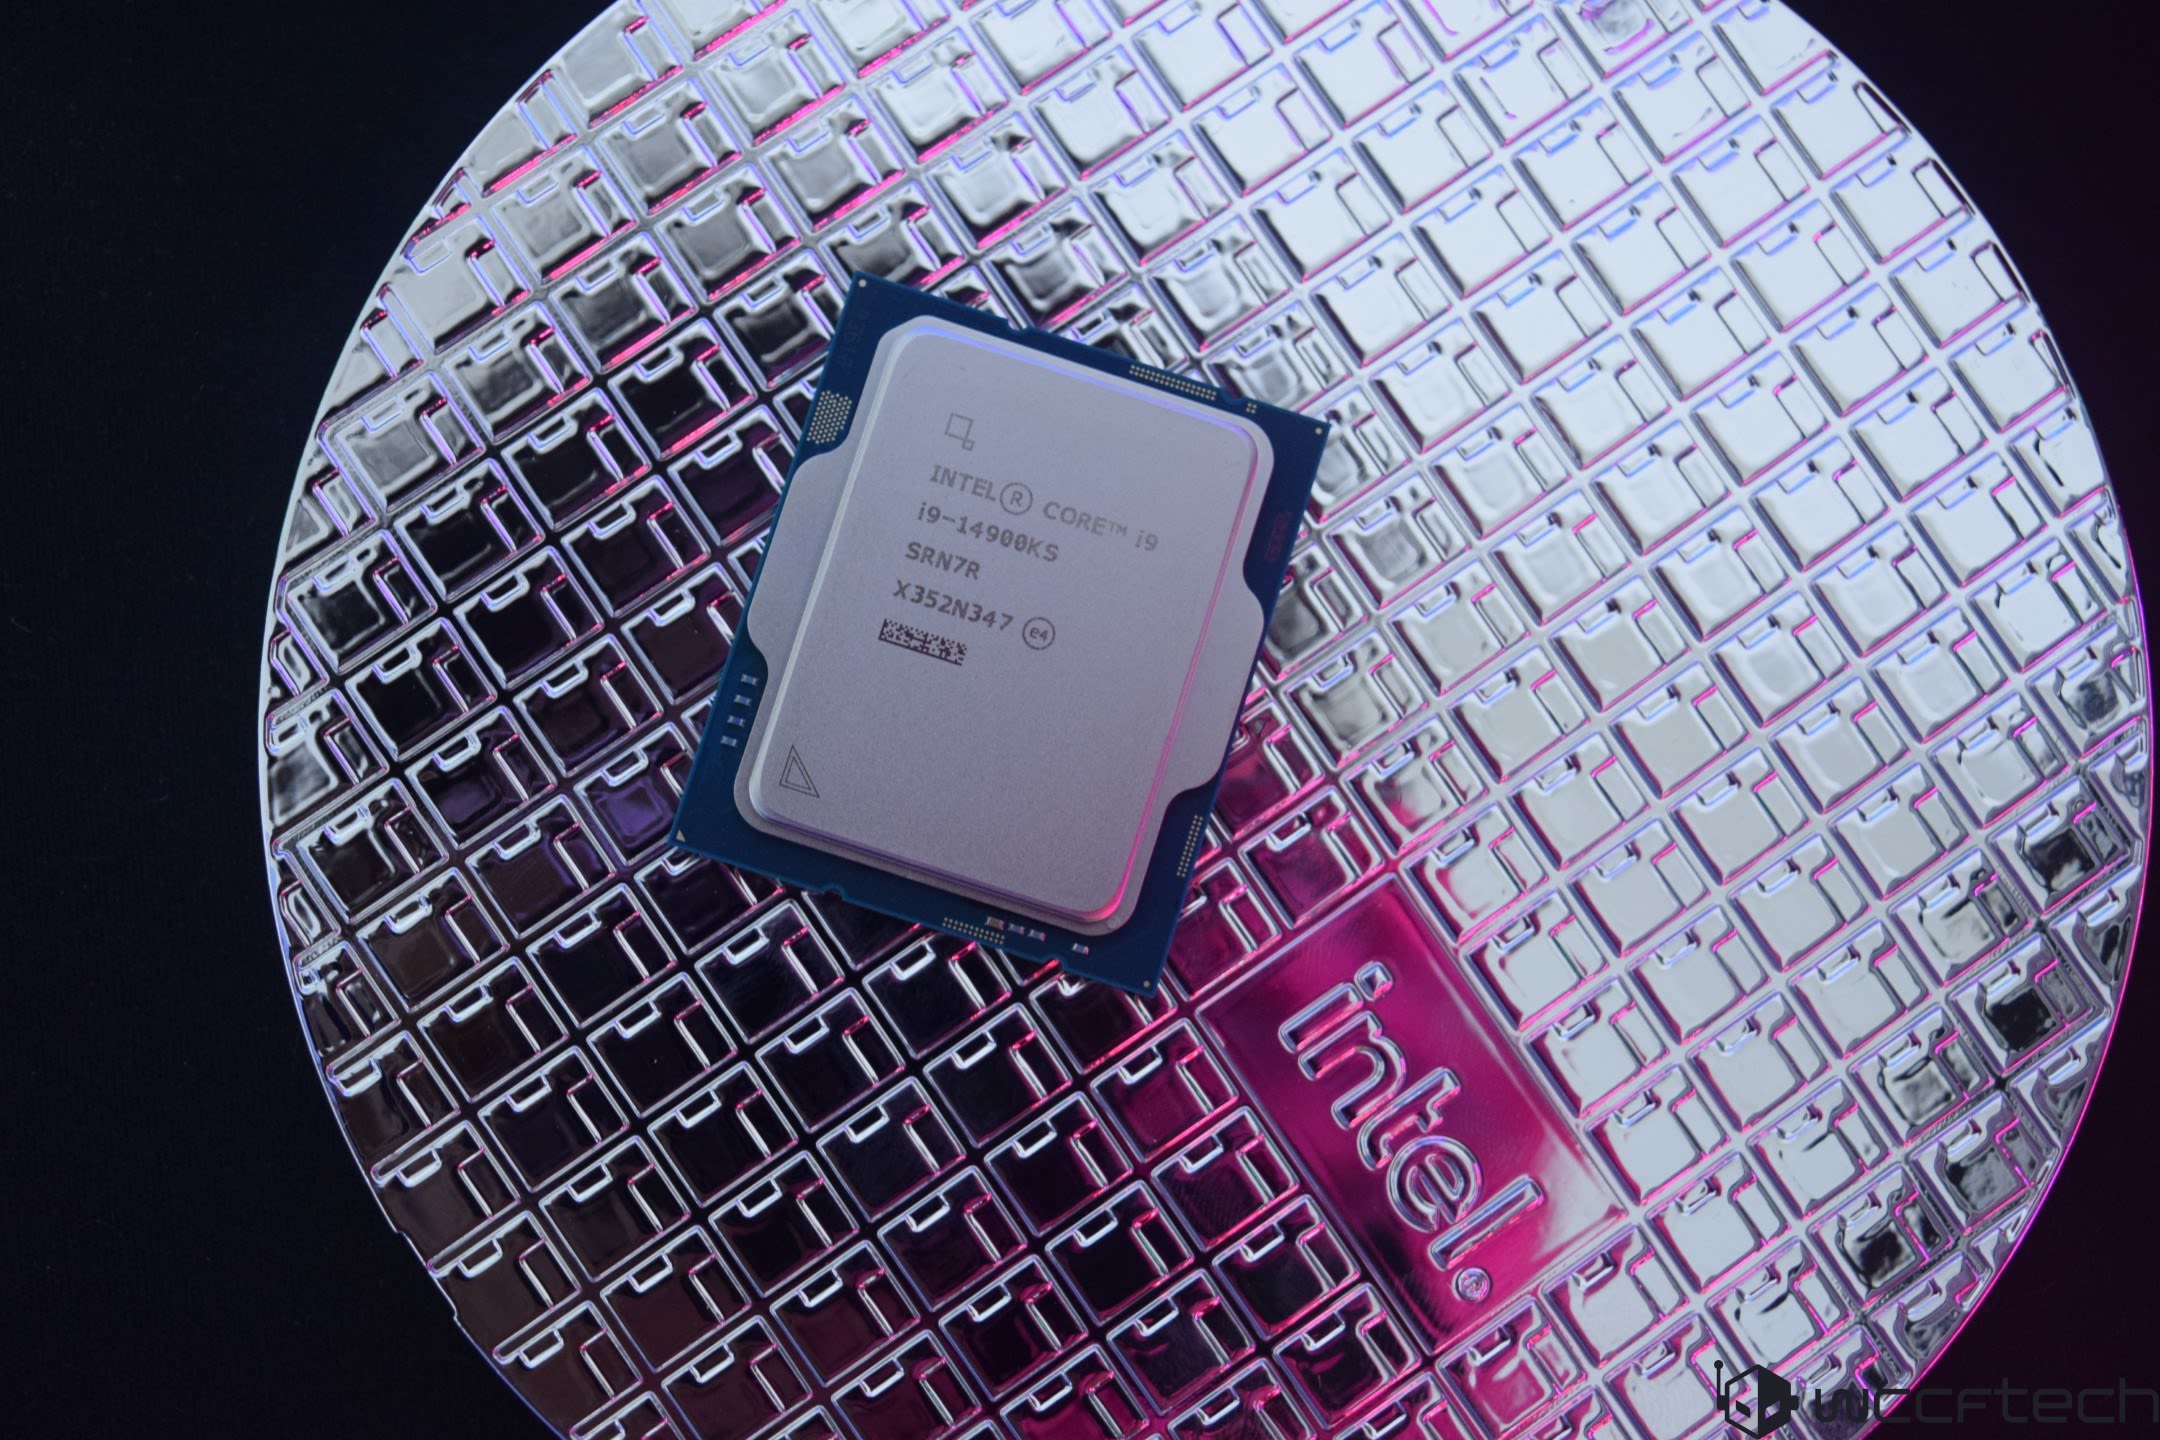 Intel Core i9-14900KS Drops Down To 5.1 GHz Clocks With "Performance" Profile, Baseline Default To Result In Further Loss